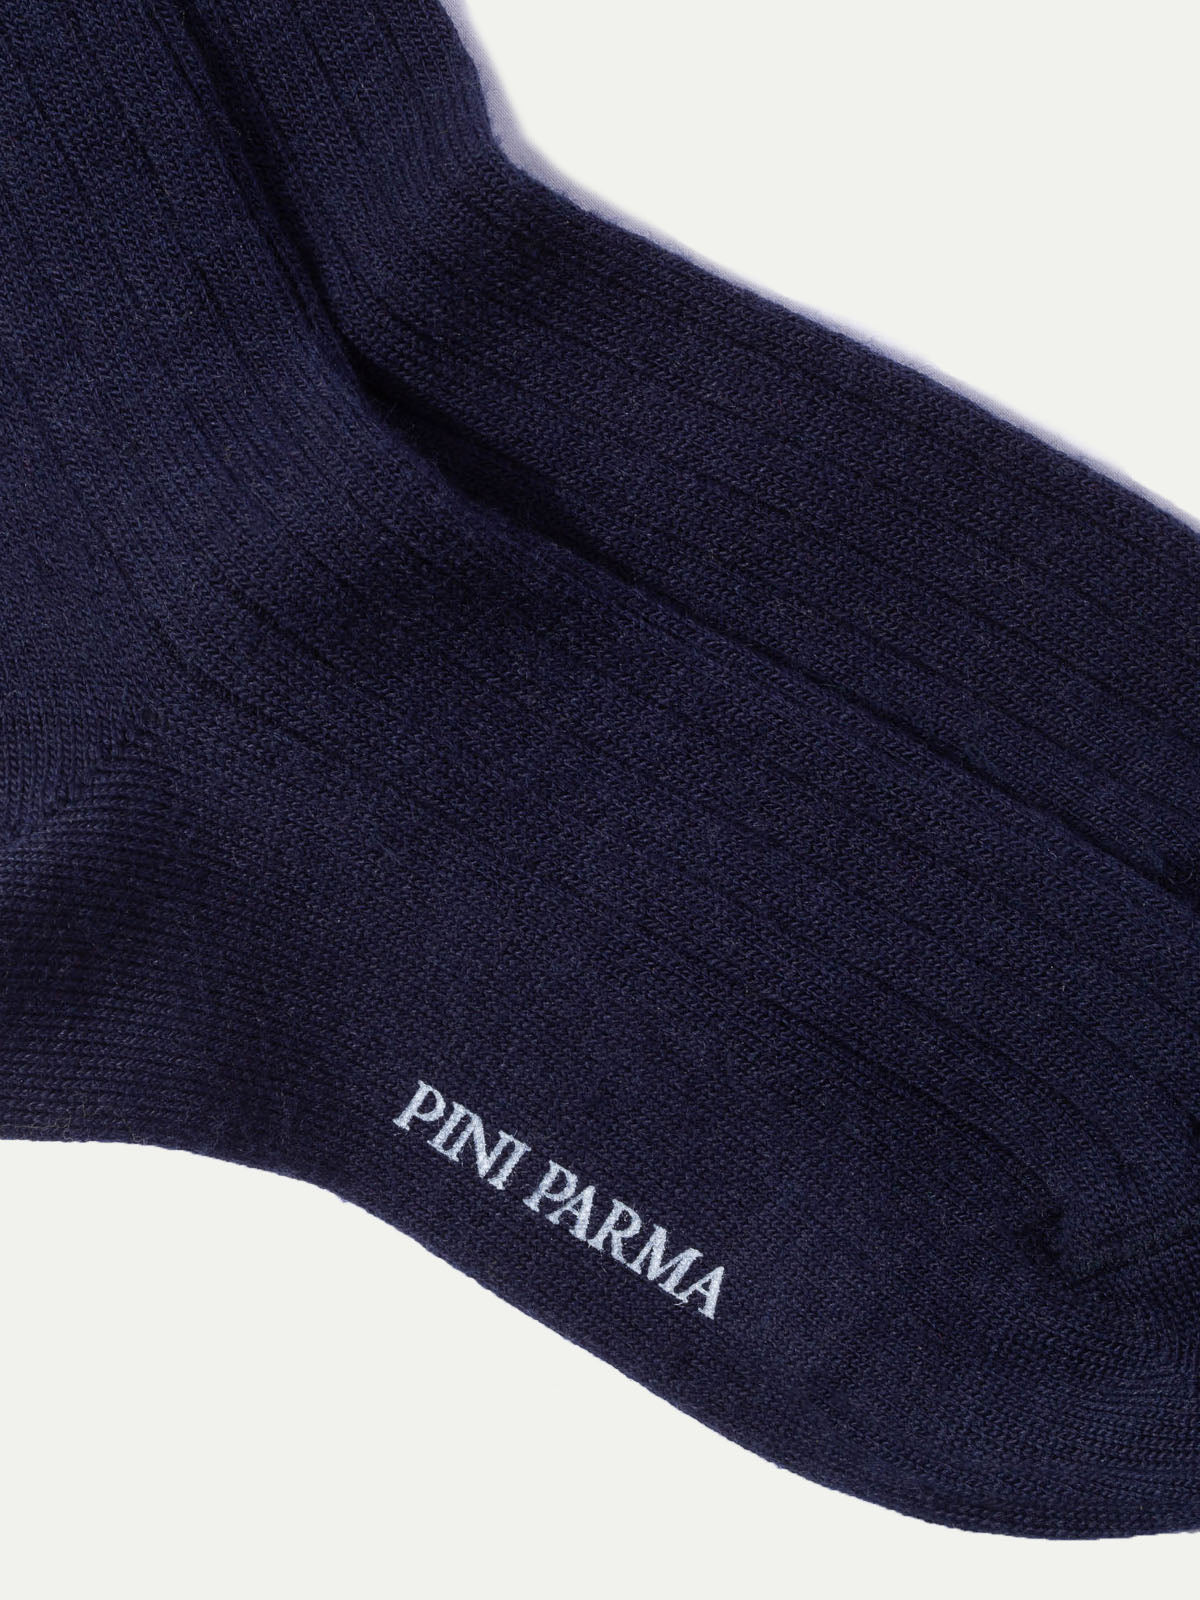 Blue - Super durable Wool short socks - Made in Italy